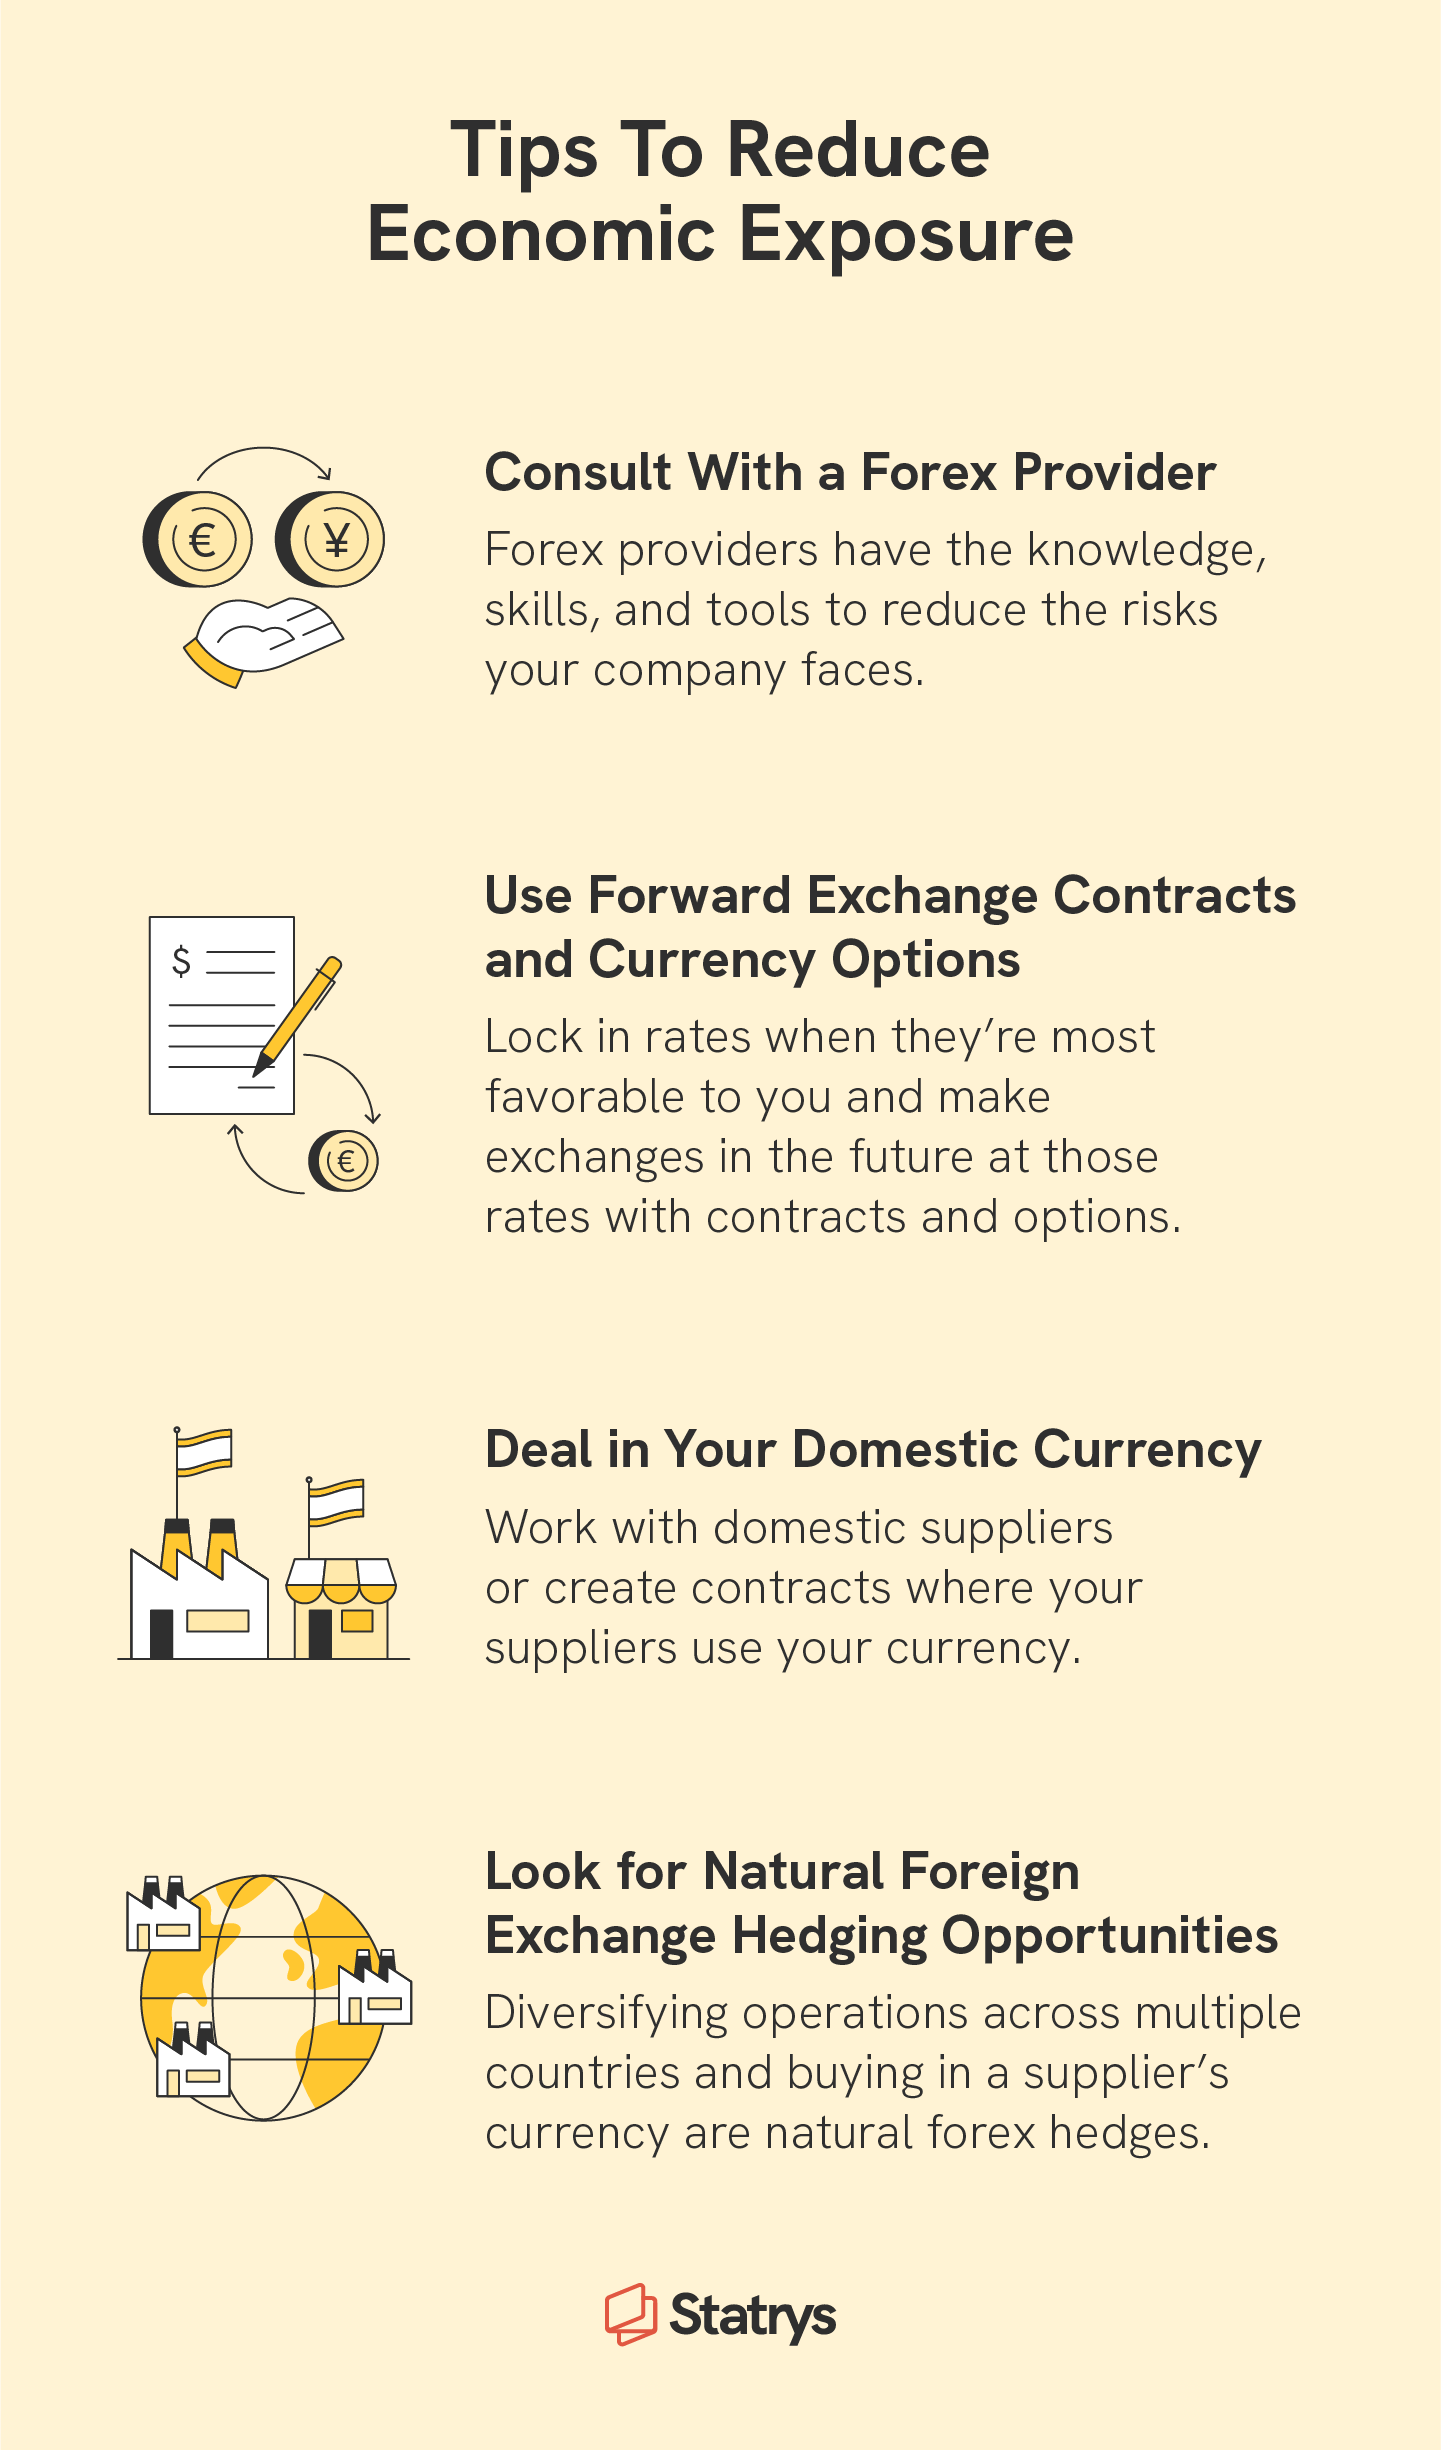 Four illustrations represent four tips to reduce economic exposure and foreign exchange risk, including consulting with a forex provider and dealing in your domestic currency.